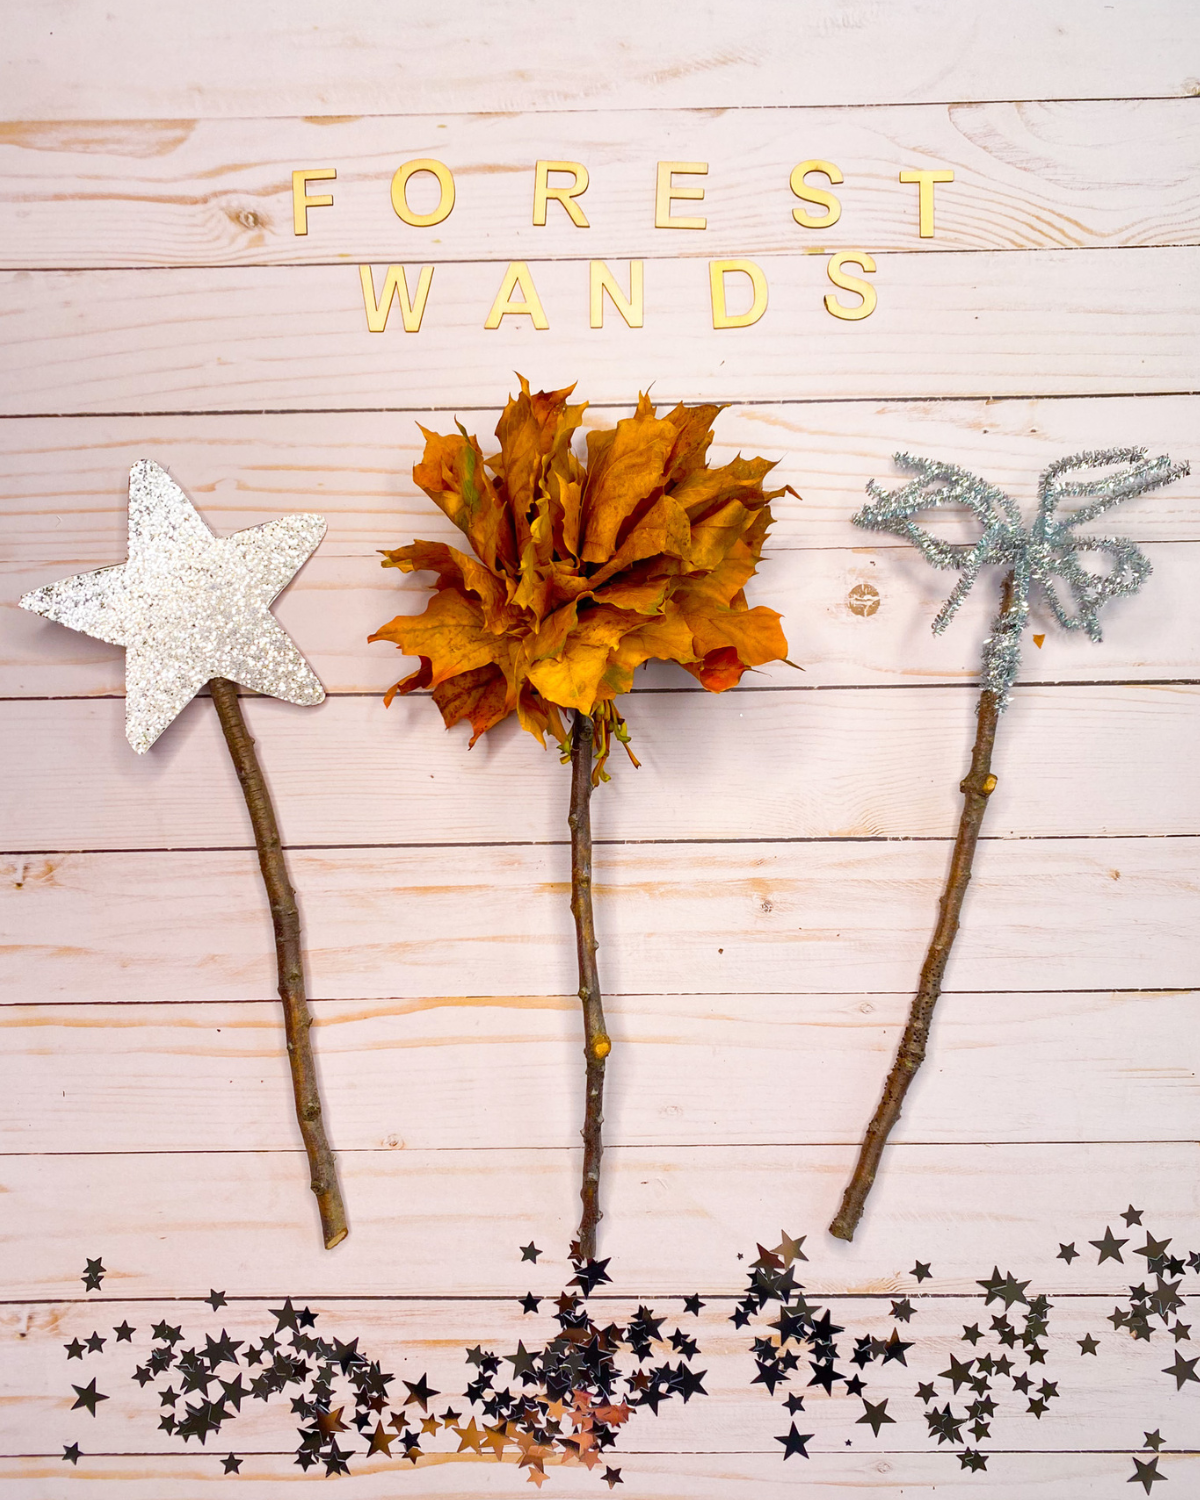 Fall-crafts-for-kids-magical-forest-wands.png